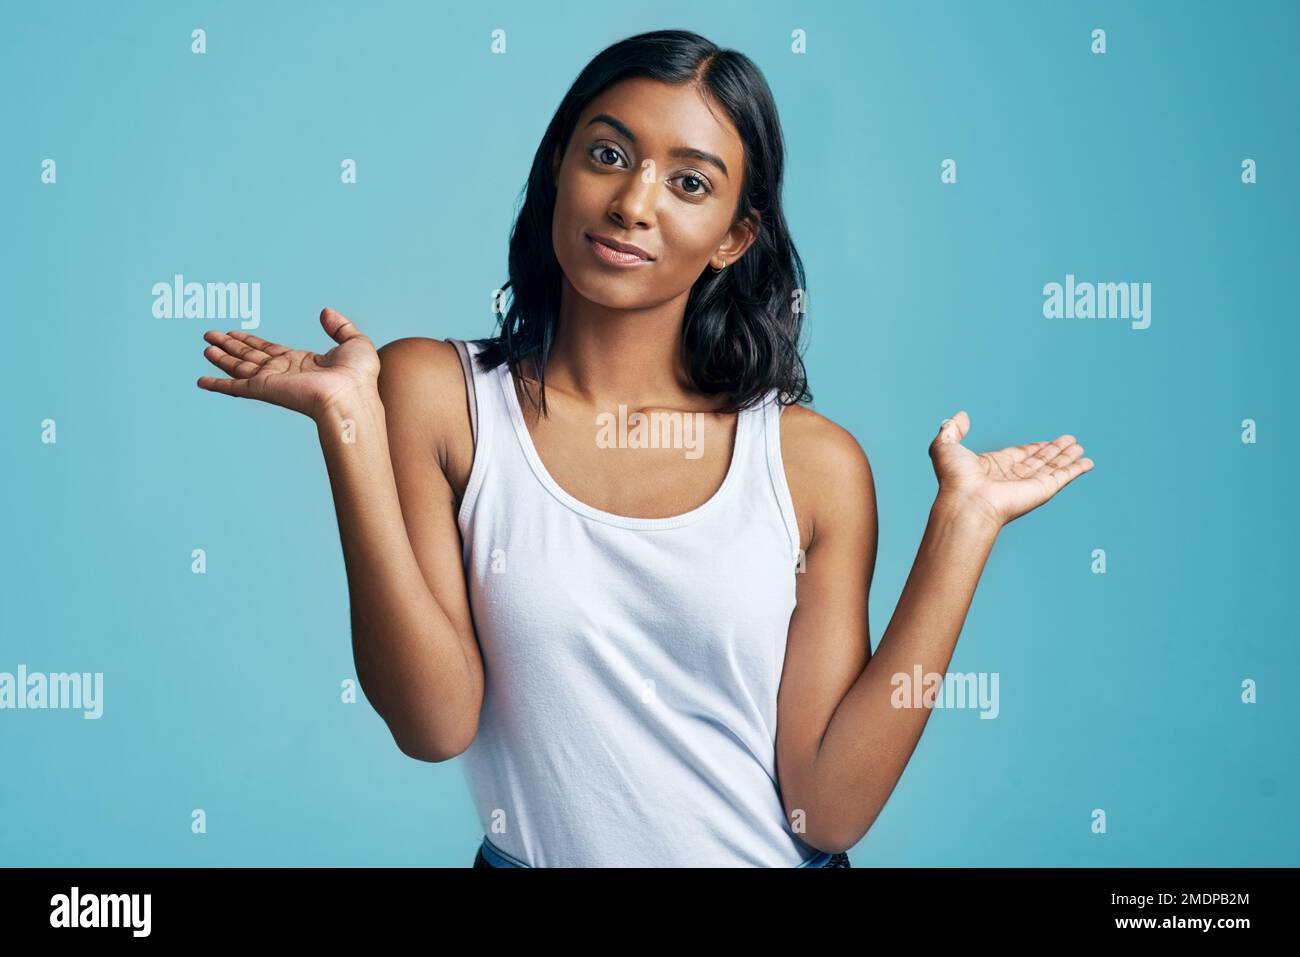 No worries. Studio portrait of a beautiful young woman shrugging her shoulders against a blue background. Stock Photo